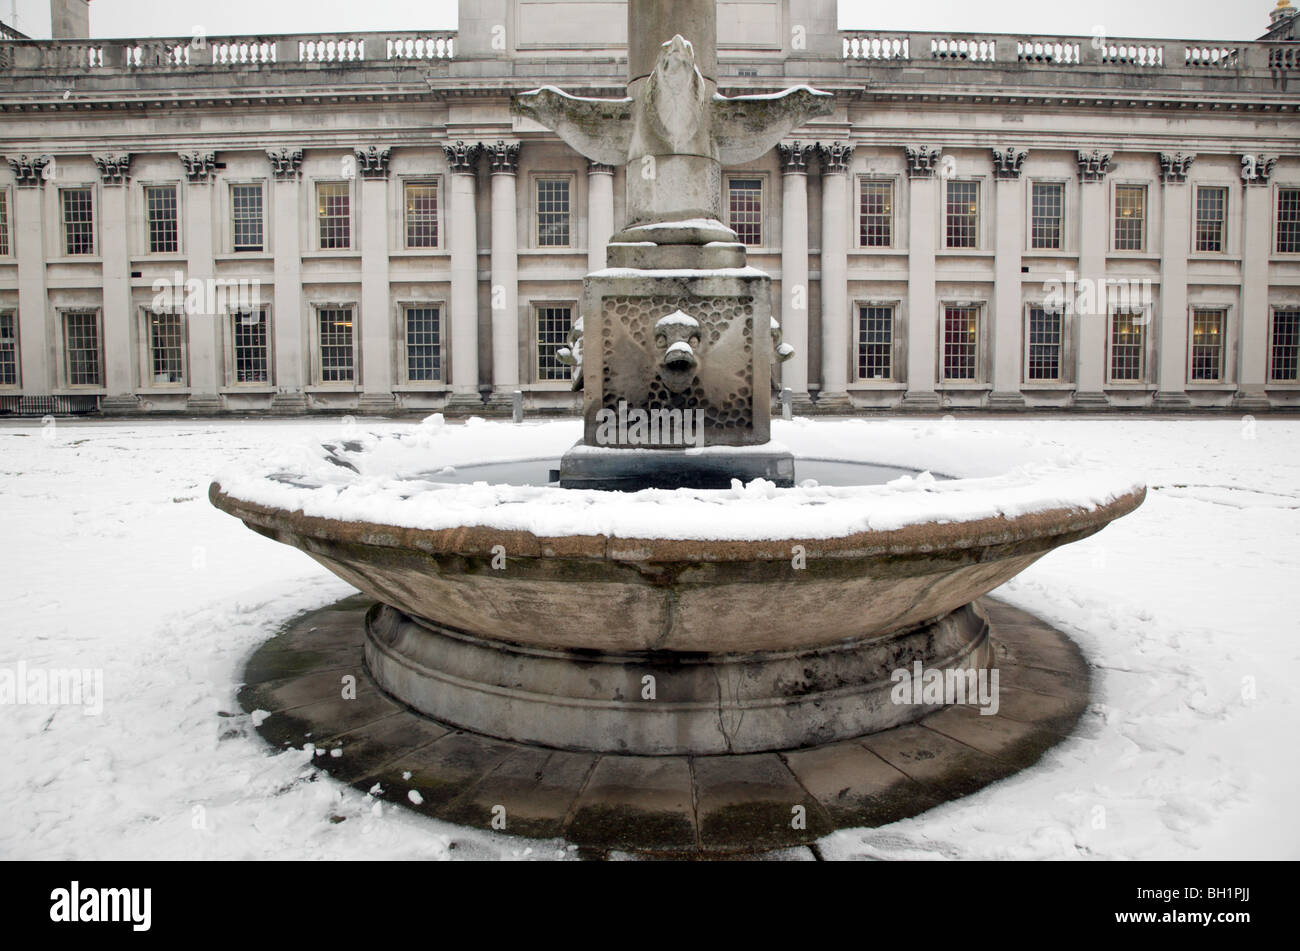 Winter scene of the frozen fountain in front of the facade of the King Charles Block of Old Royal Naval College Greenwich Stock Photo